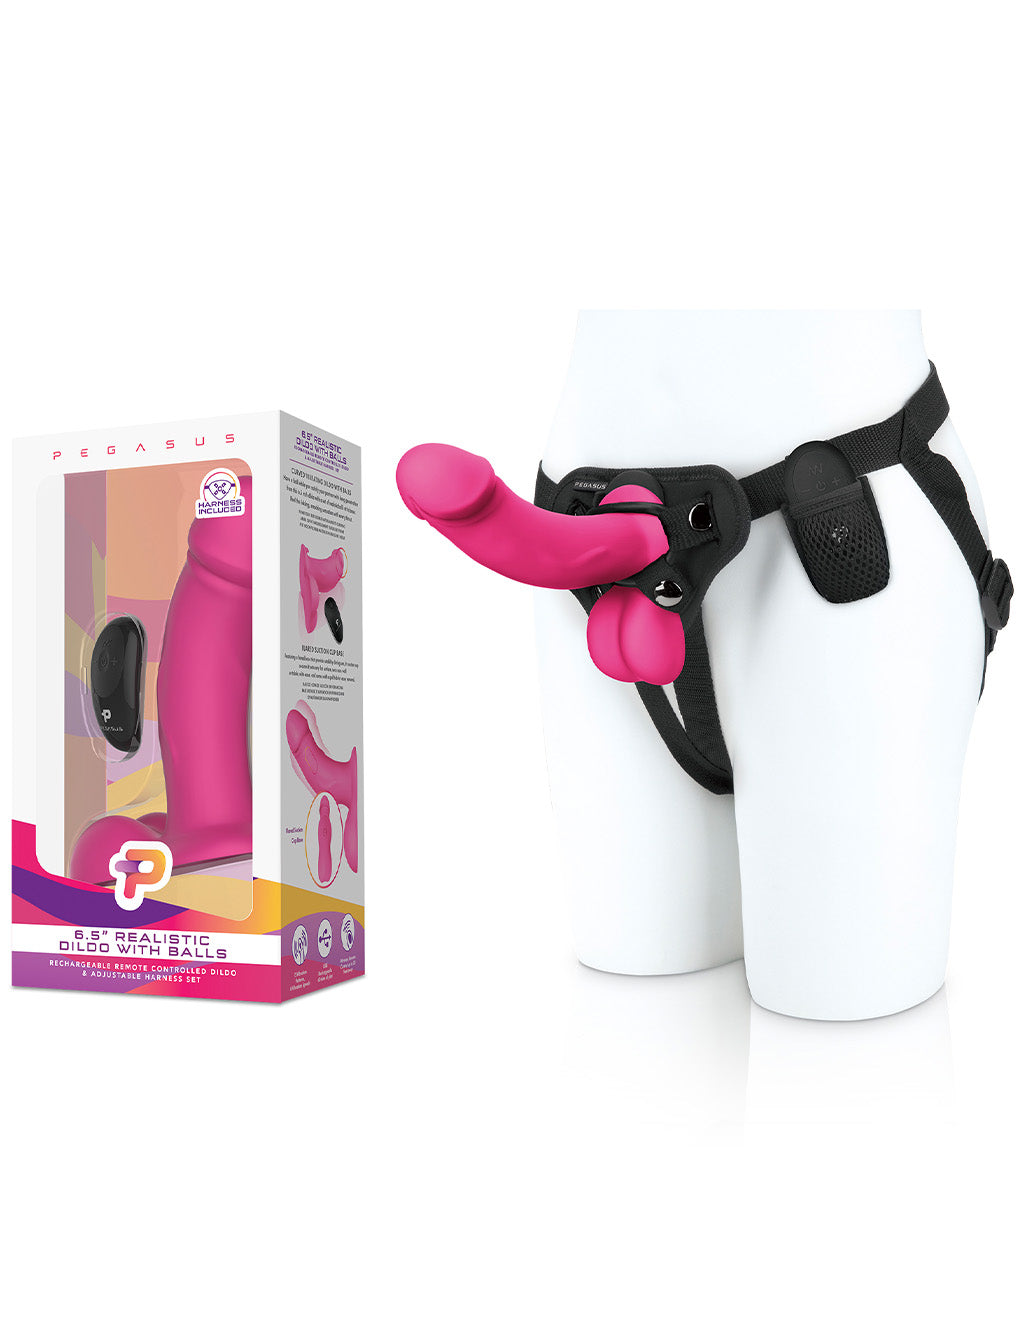 Pegasus 6.5" Realistic Dildo with Balls Strap-On Set- Package